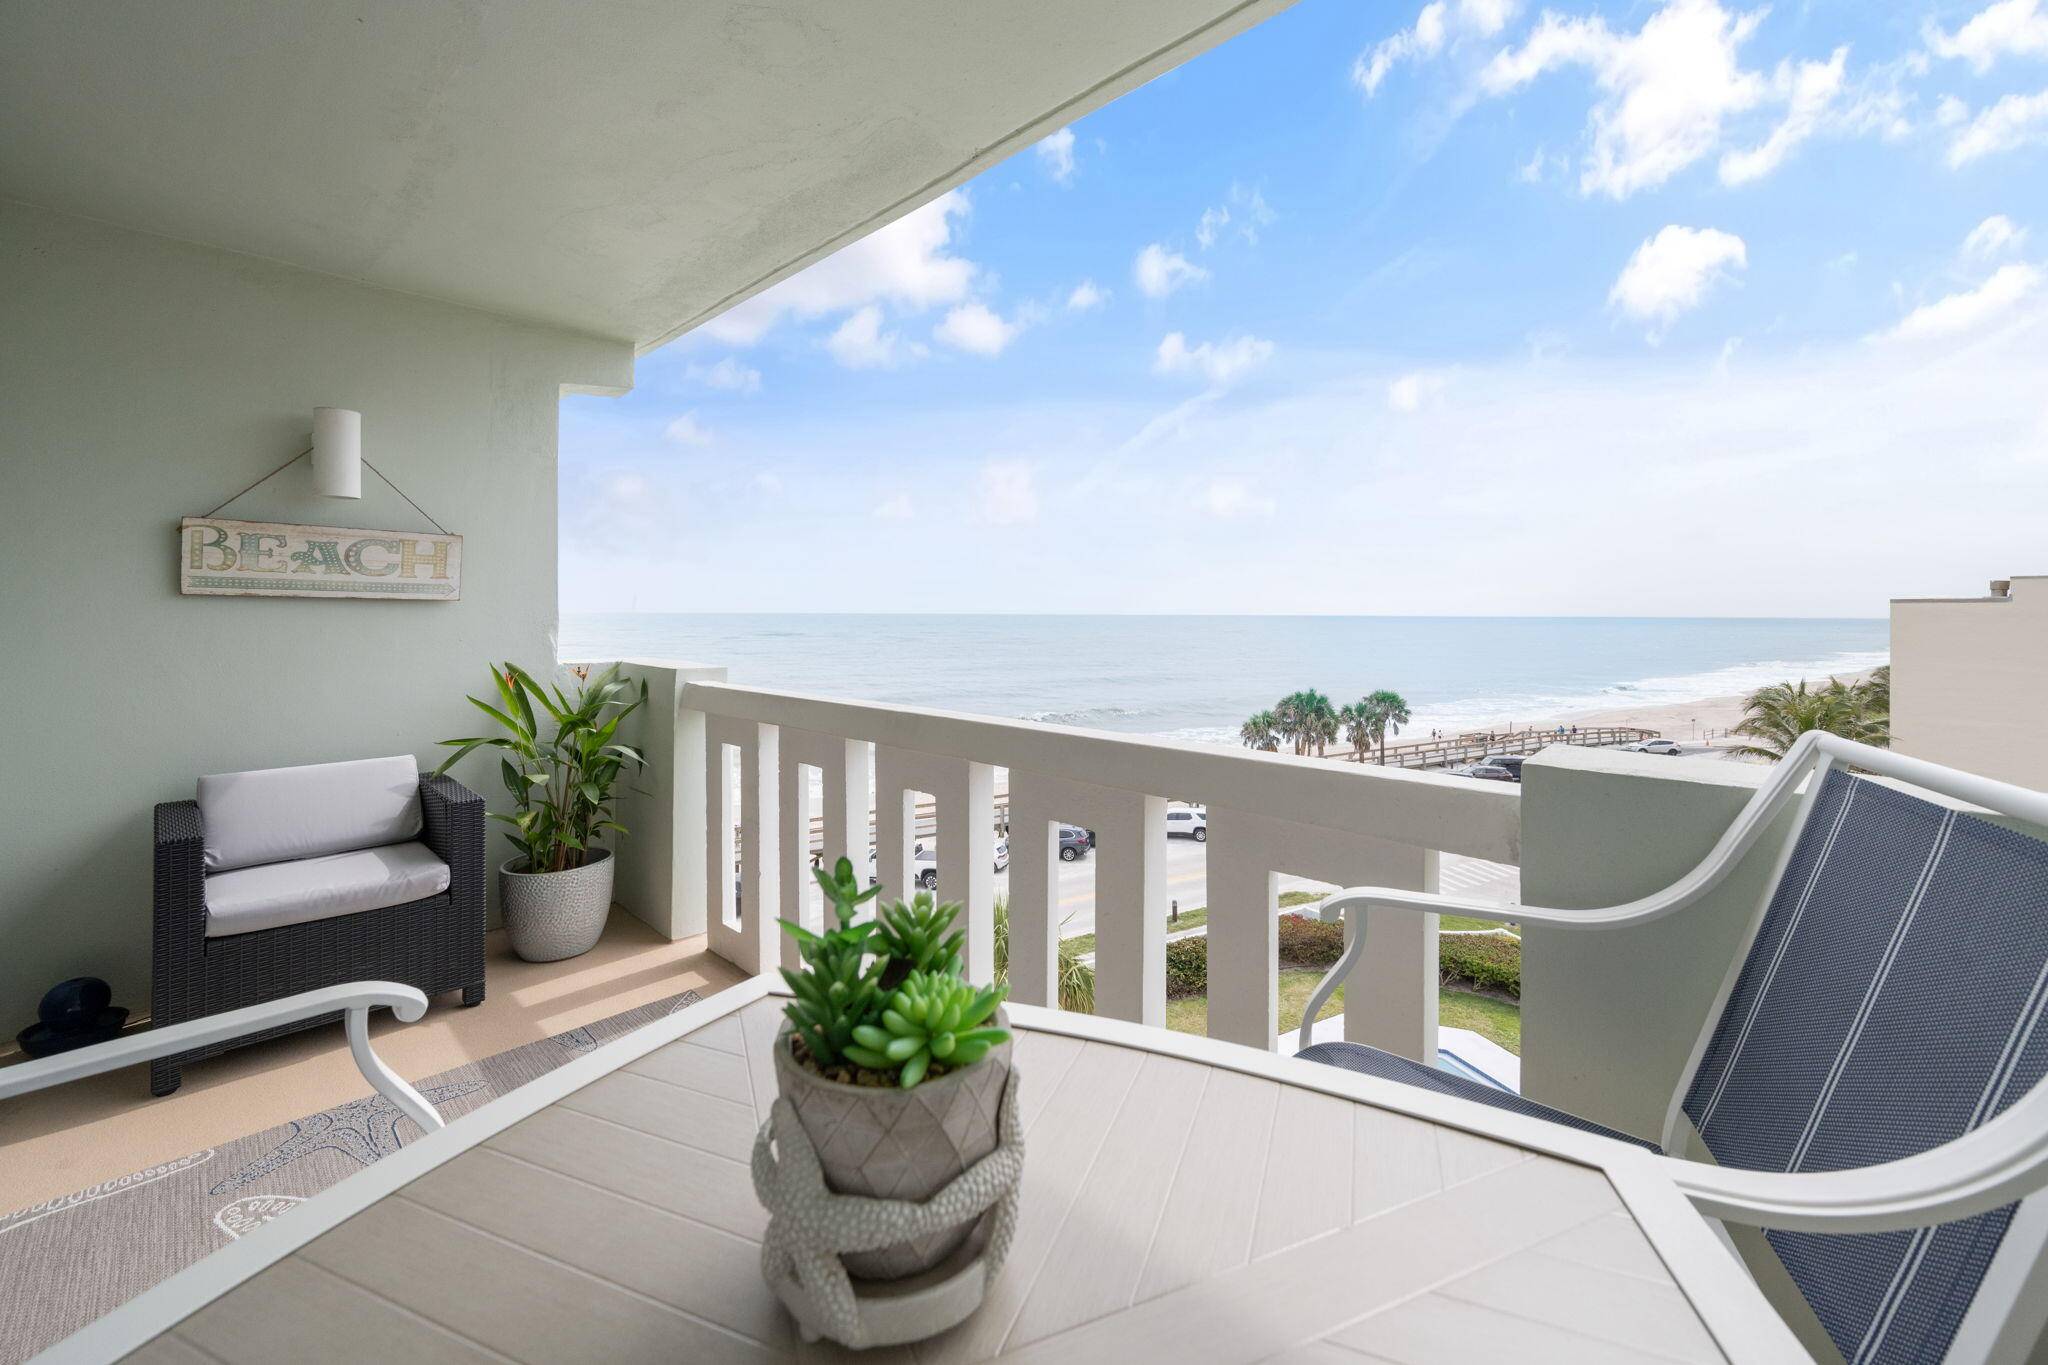 Wake up to the waves ! This 5th floor unit with ocean views offers not just a home, but a lifestyle.